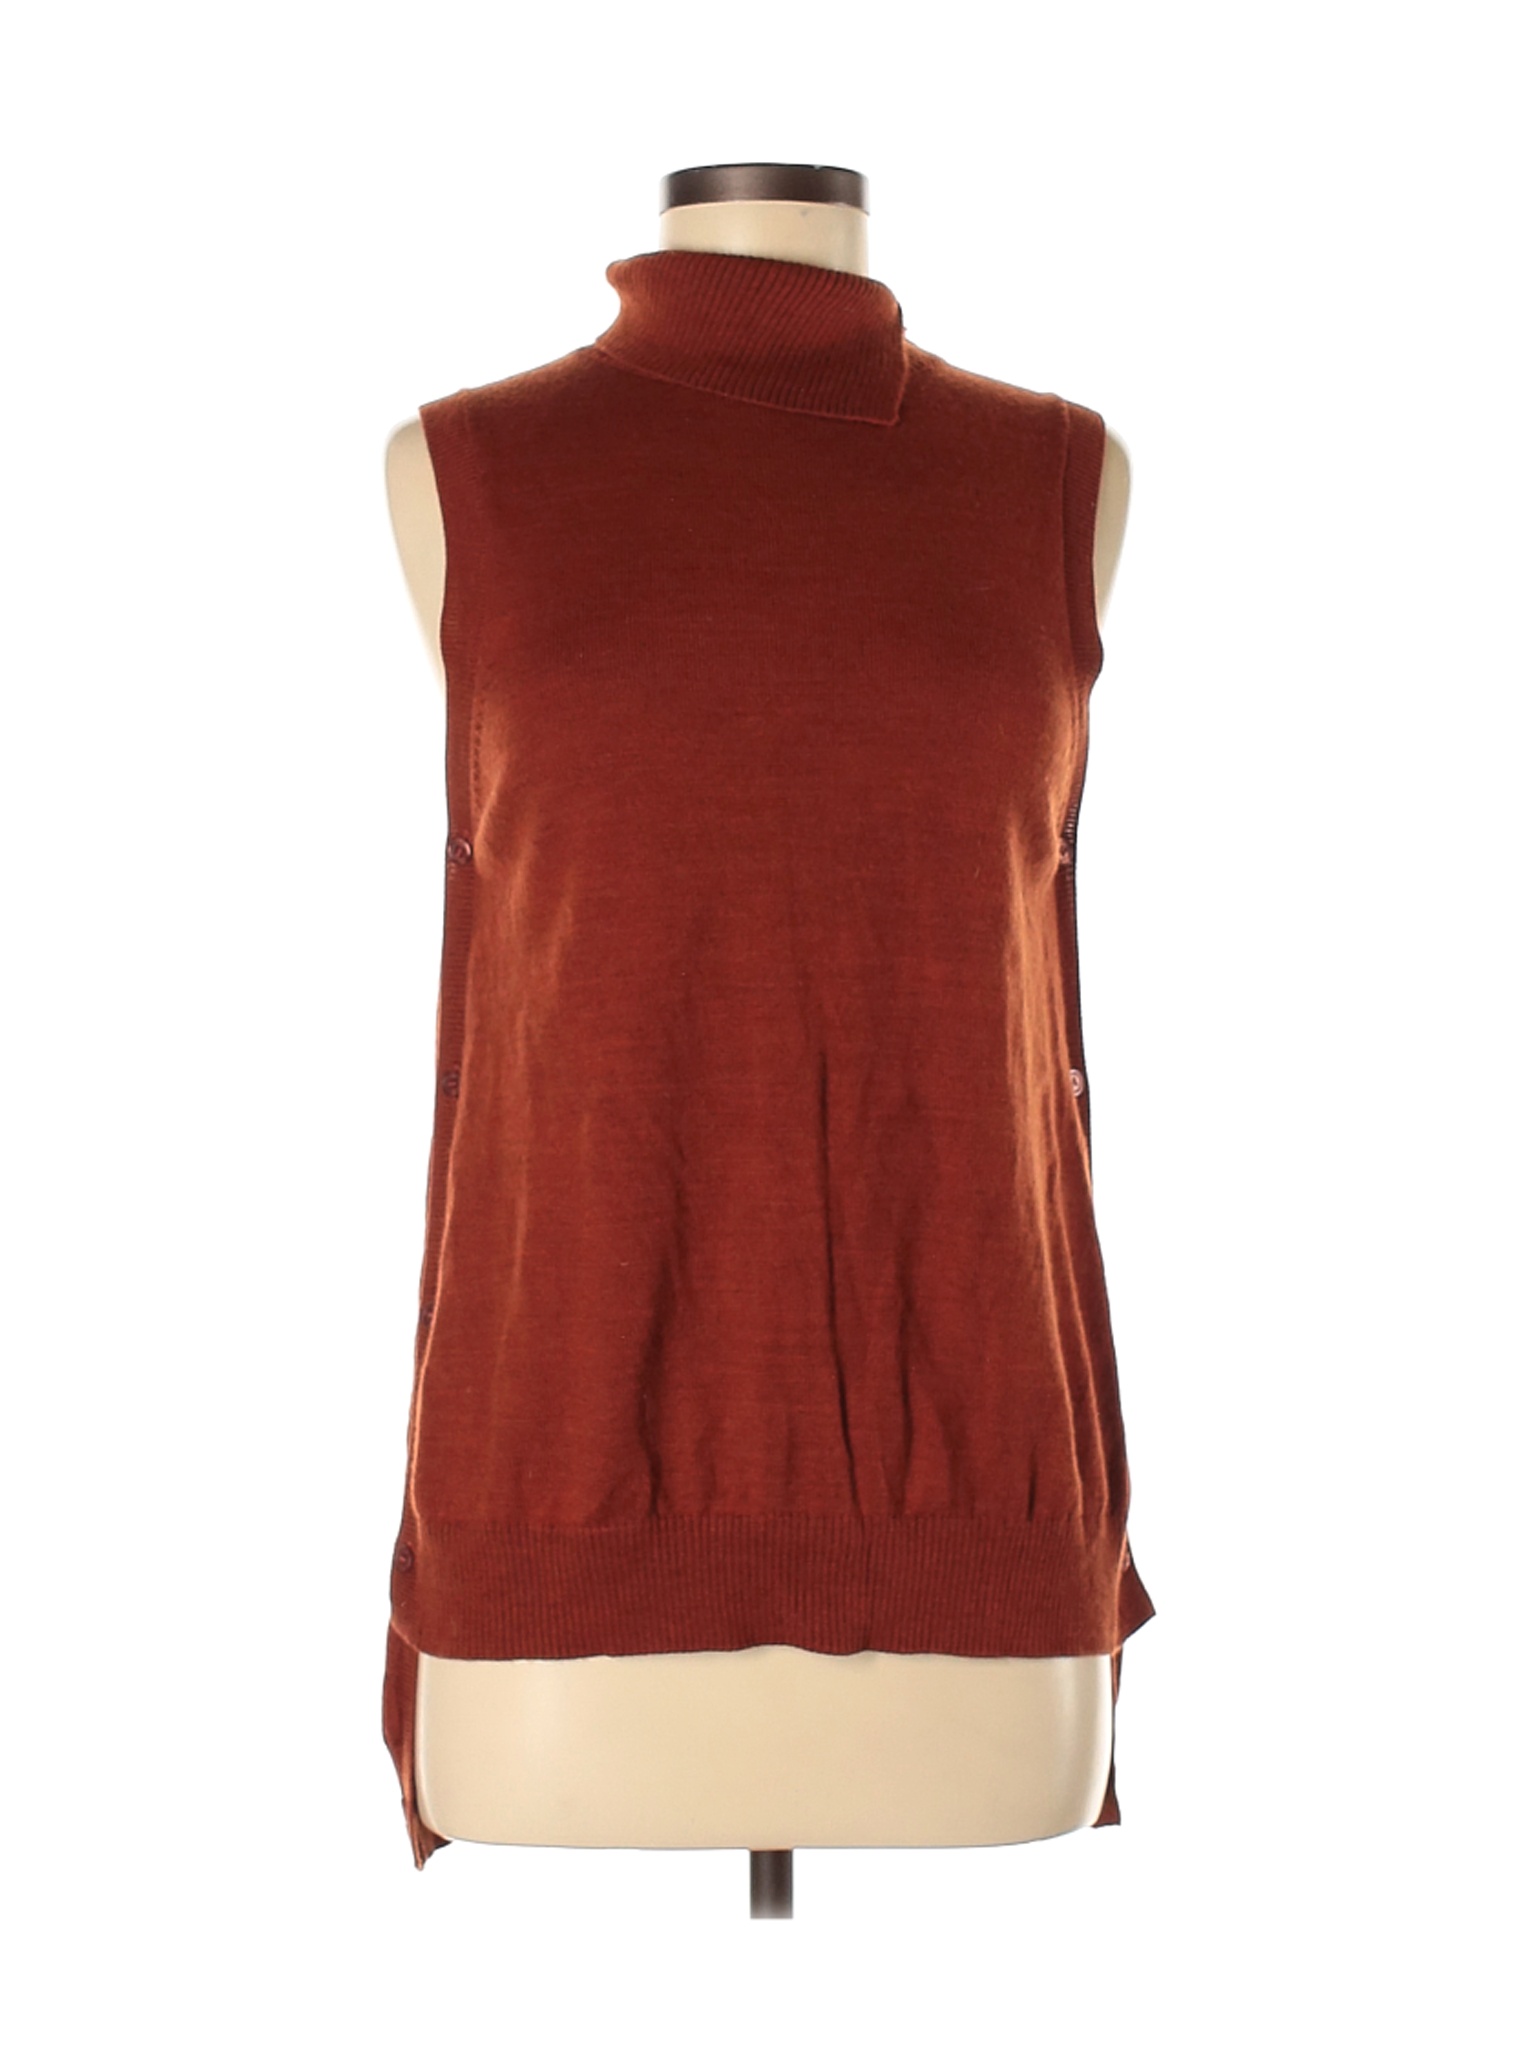 The Limited Women Brown Sweater Vest M | eBay